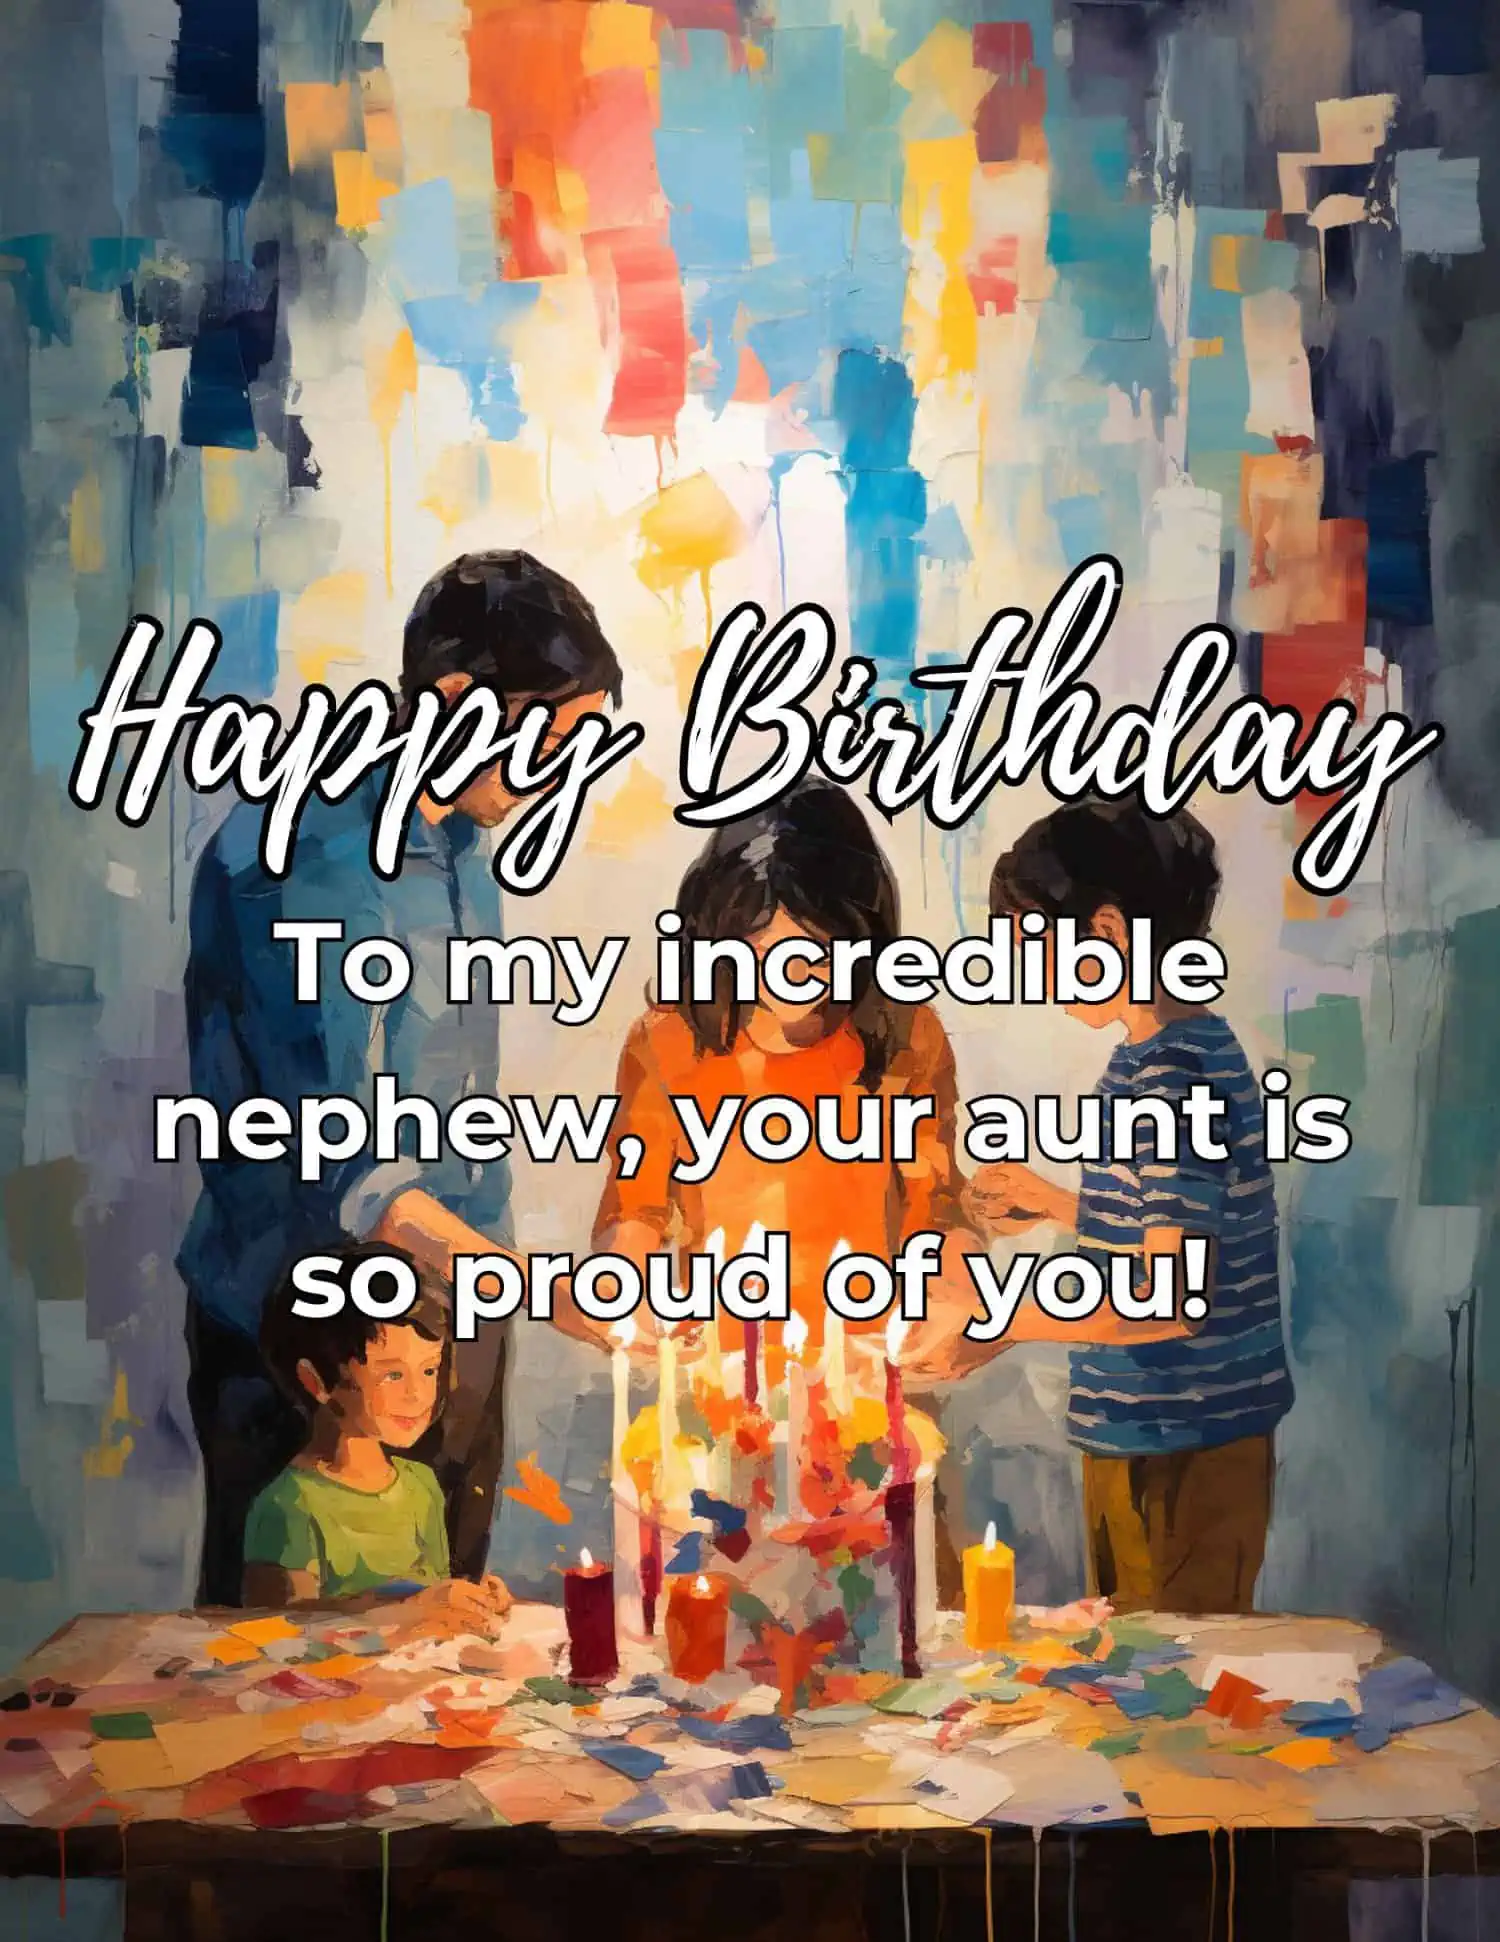 A collection of heartfelt and loving birthday wishes from an aunt to her nephew.